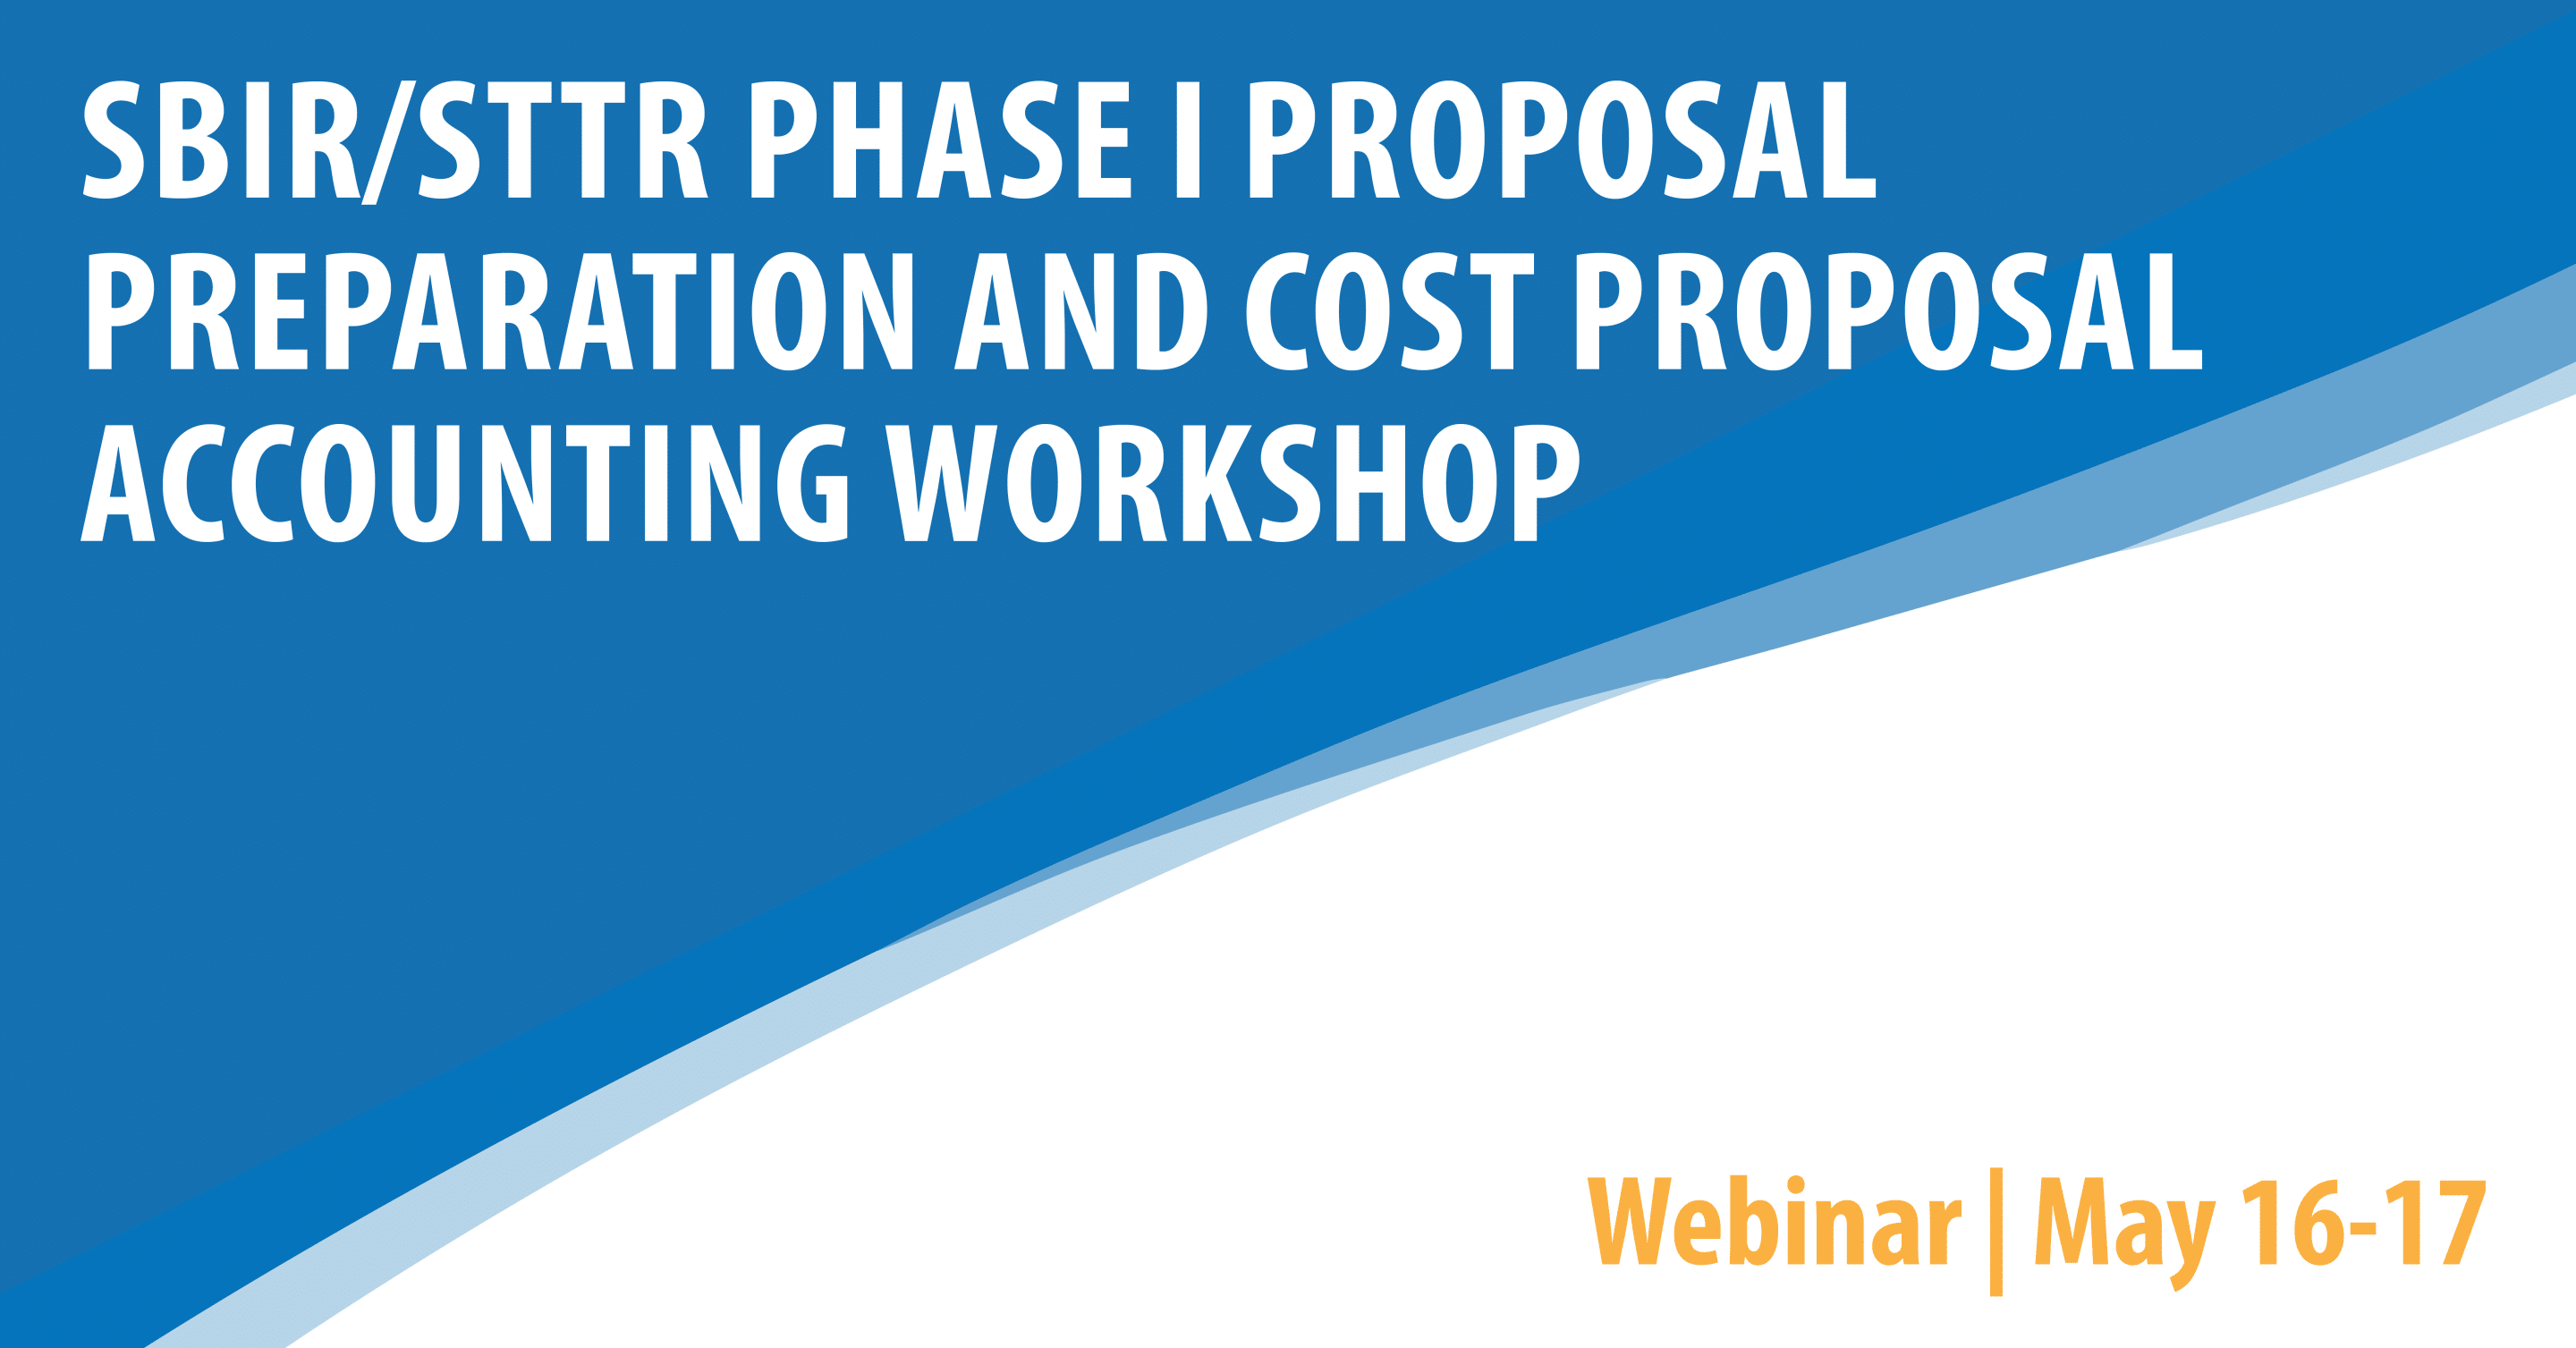 SBIR/STTR Phase I Proposal Preparation and Cost Proposal Accounting Virtual Workshop